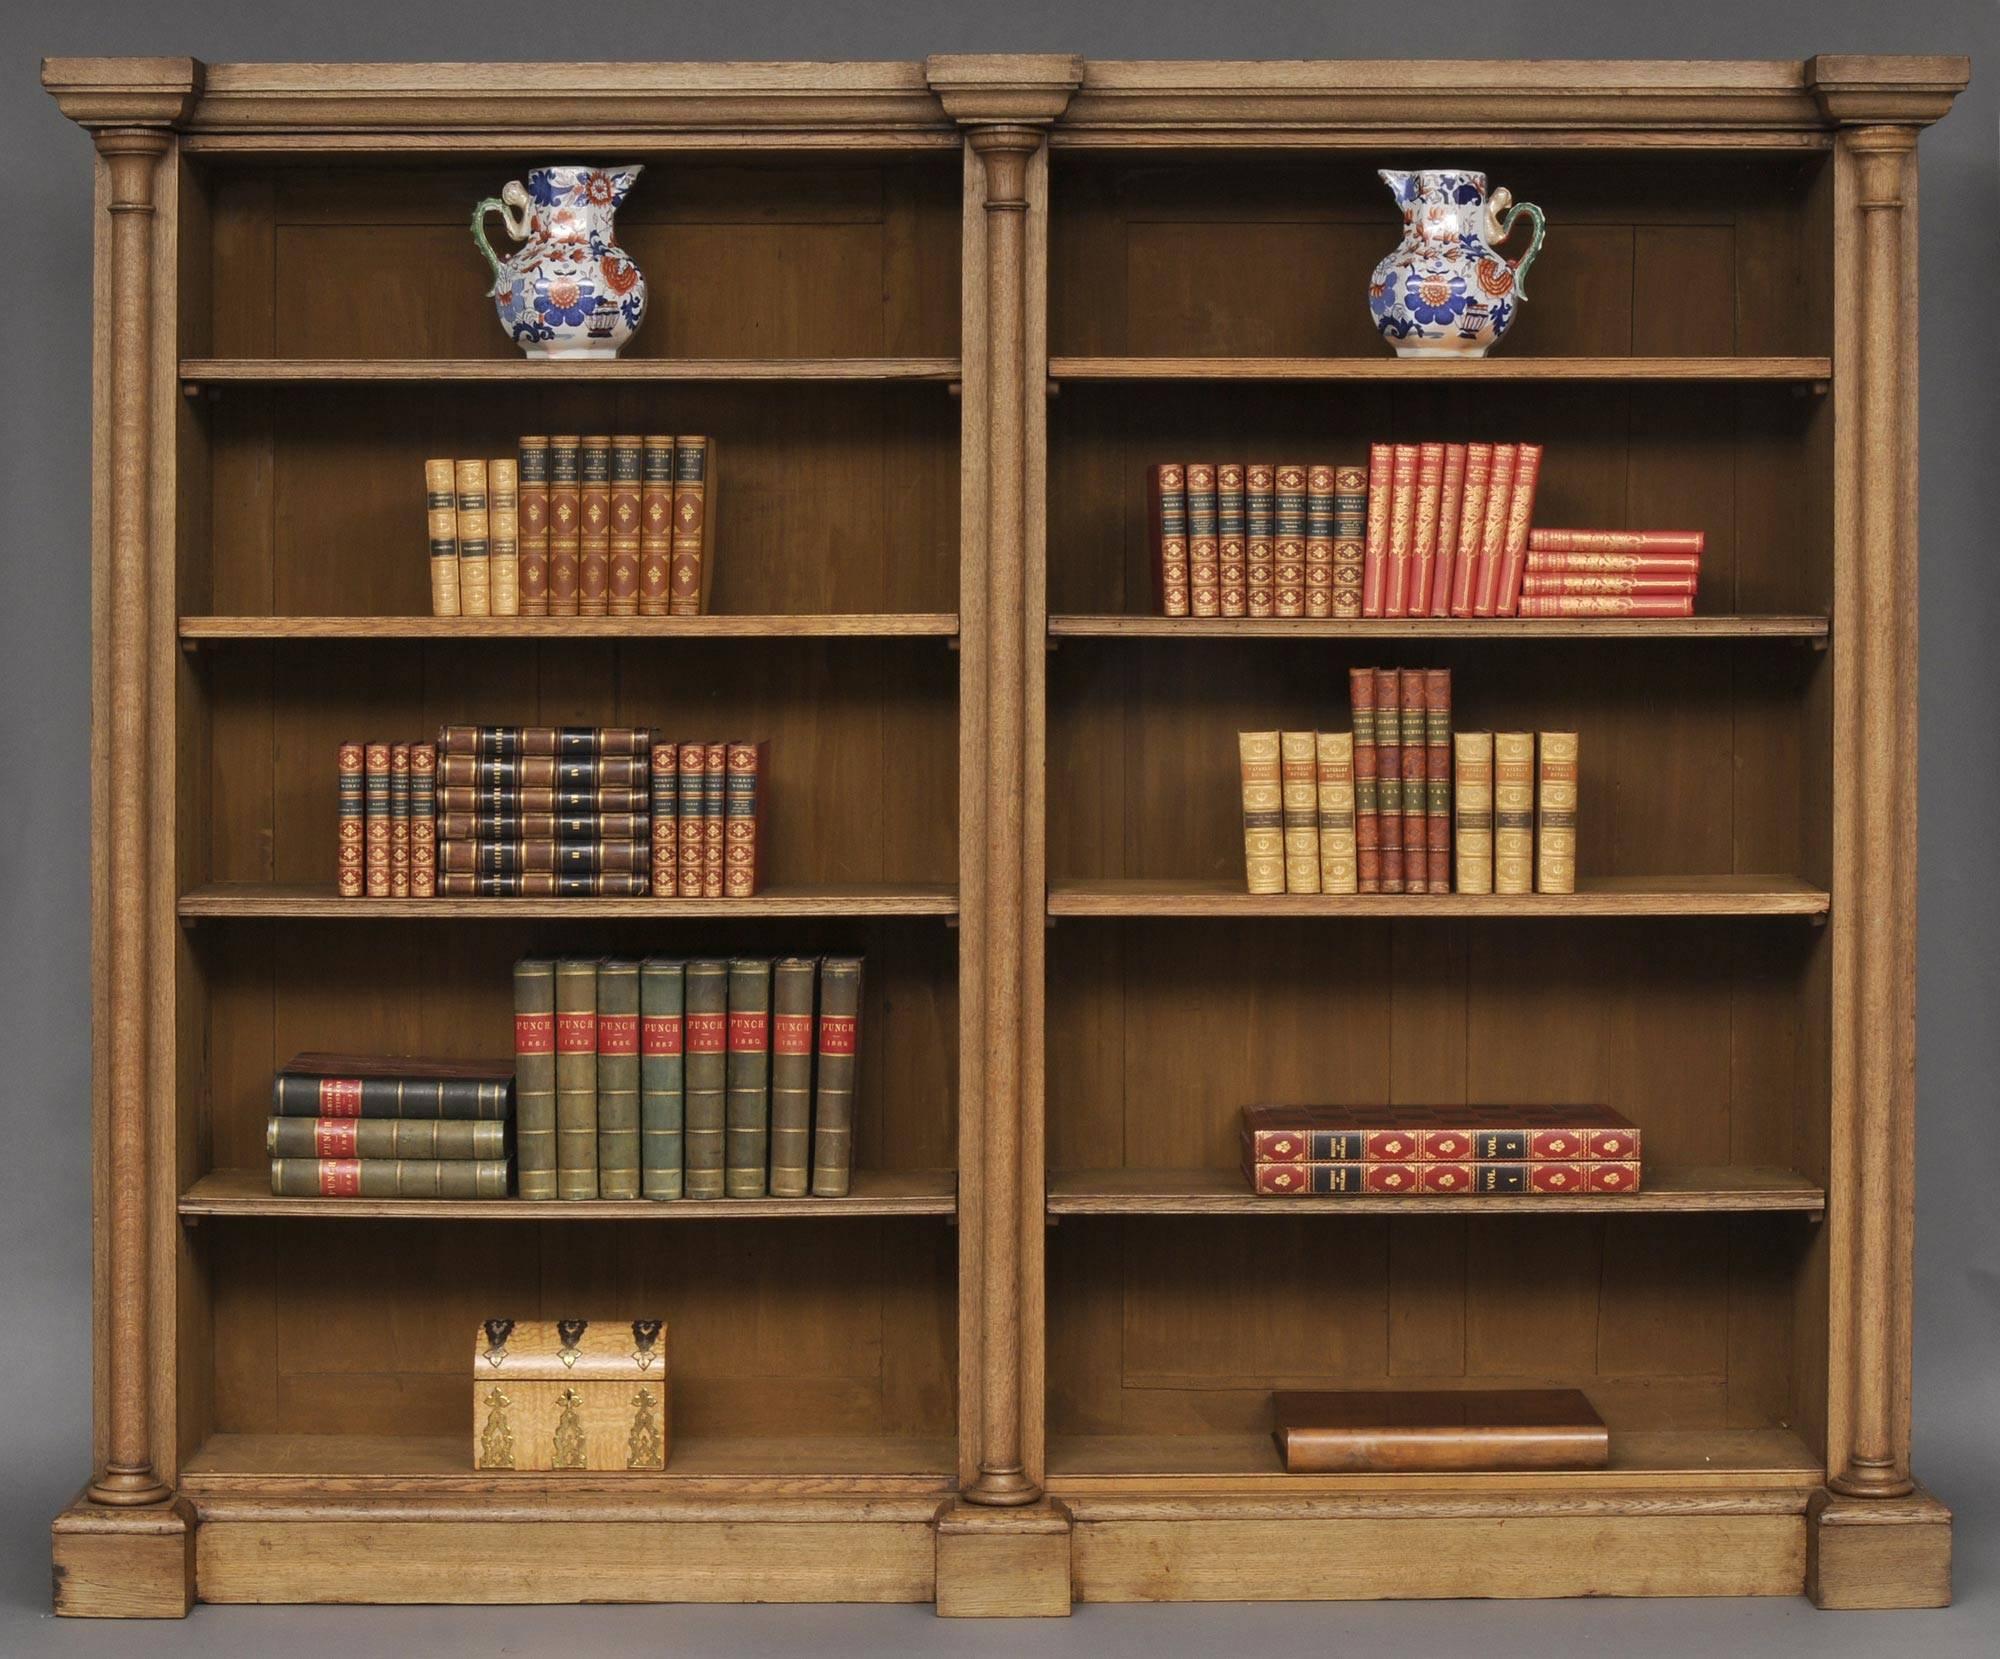 William IV bleached oak library open bookcase with breakfront molded cornice, the two sections each with four adjustable shelves, divided by three projecting columns, raised on plinth base. 

Shelf depth: 10.25